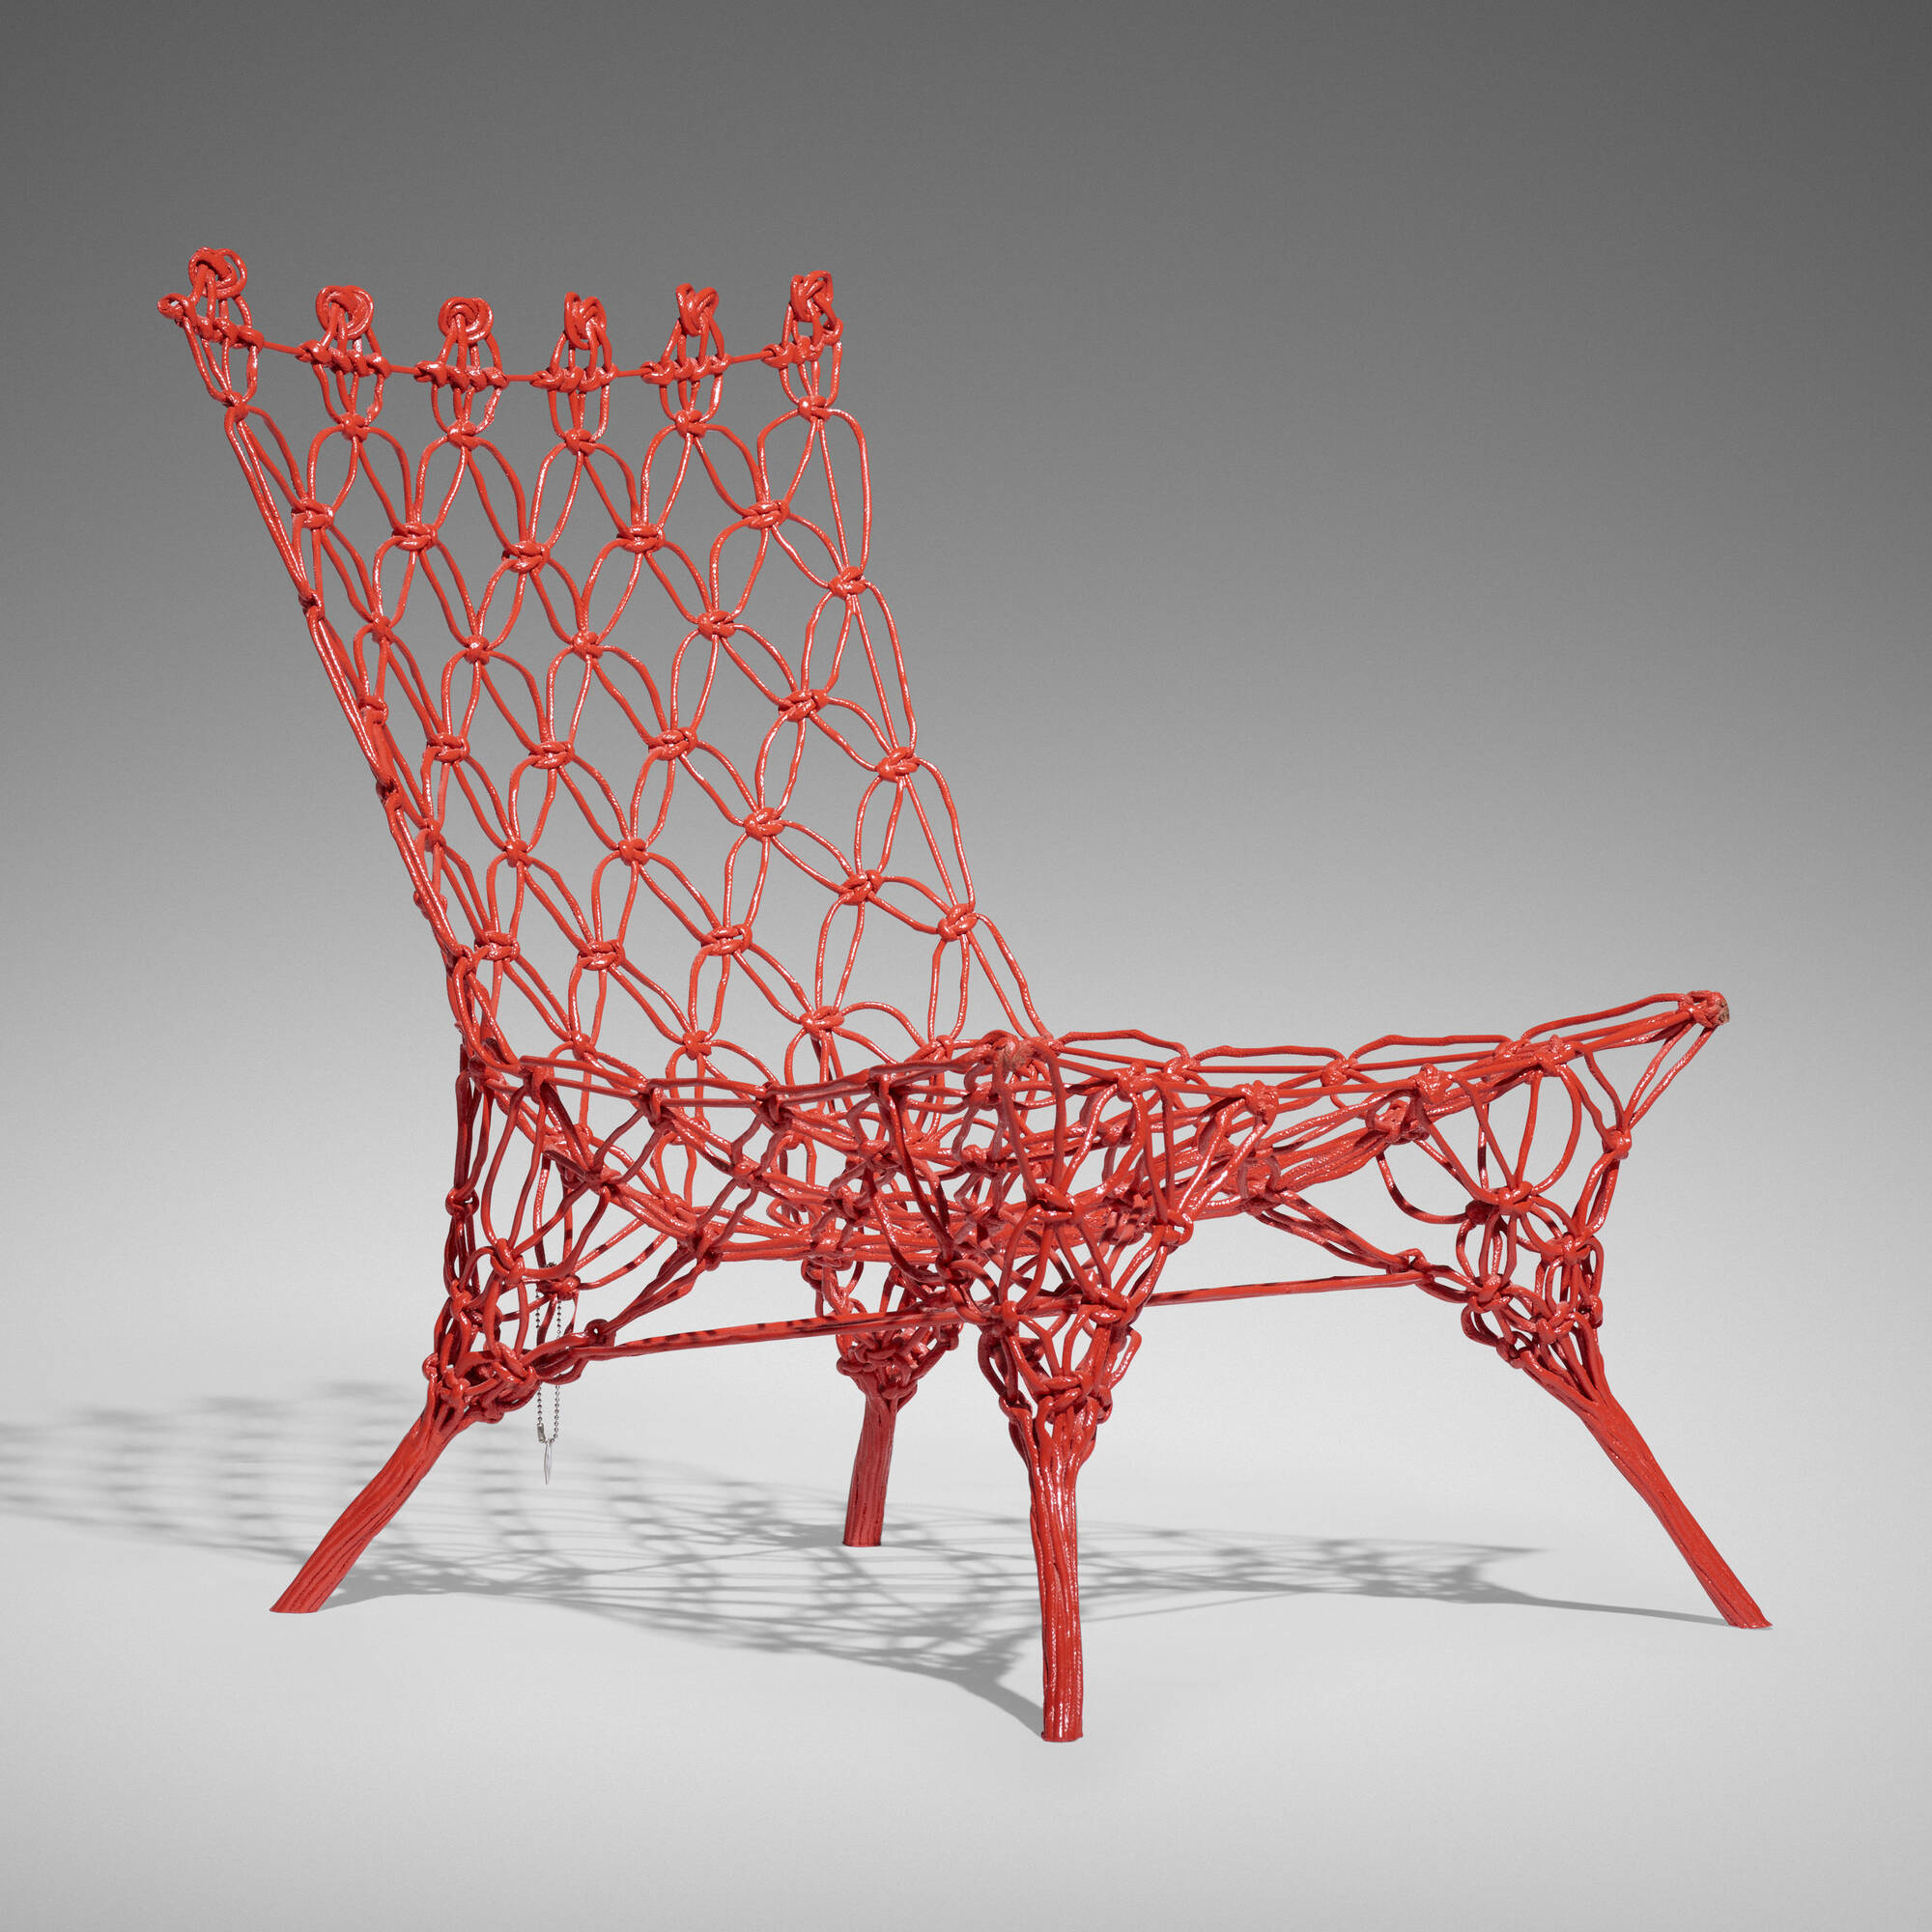 Marcel Wanders, KNOTTED CHAIR (2000)